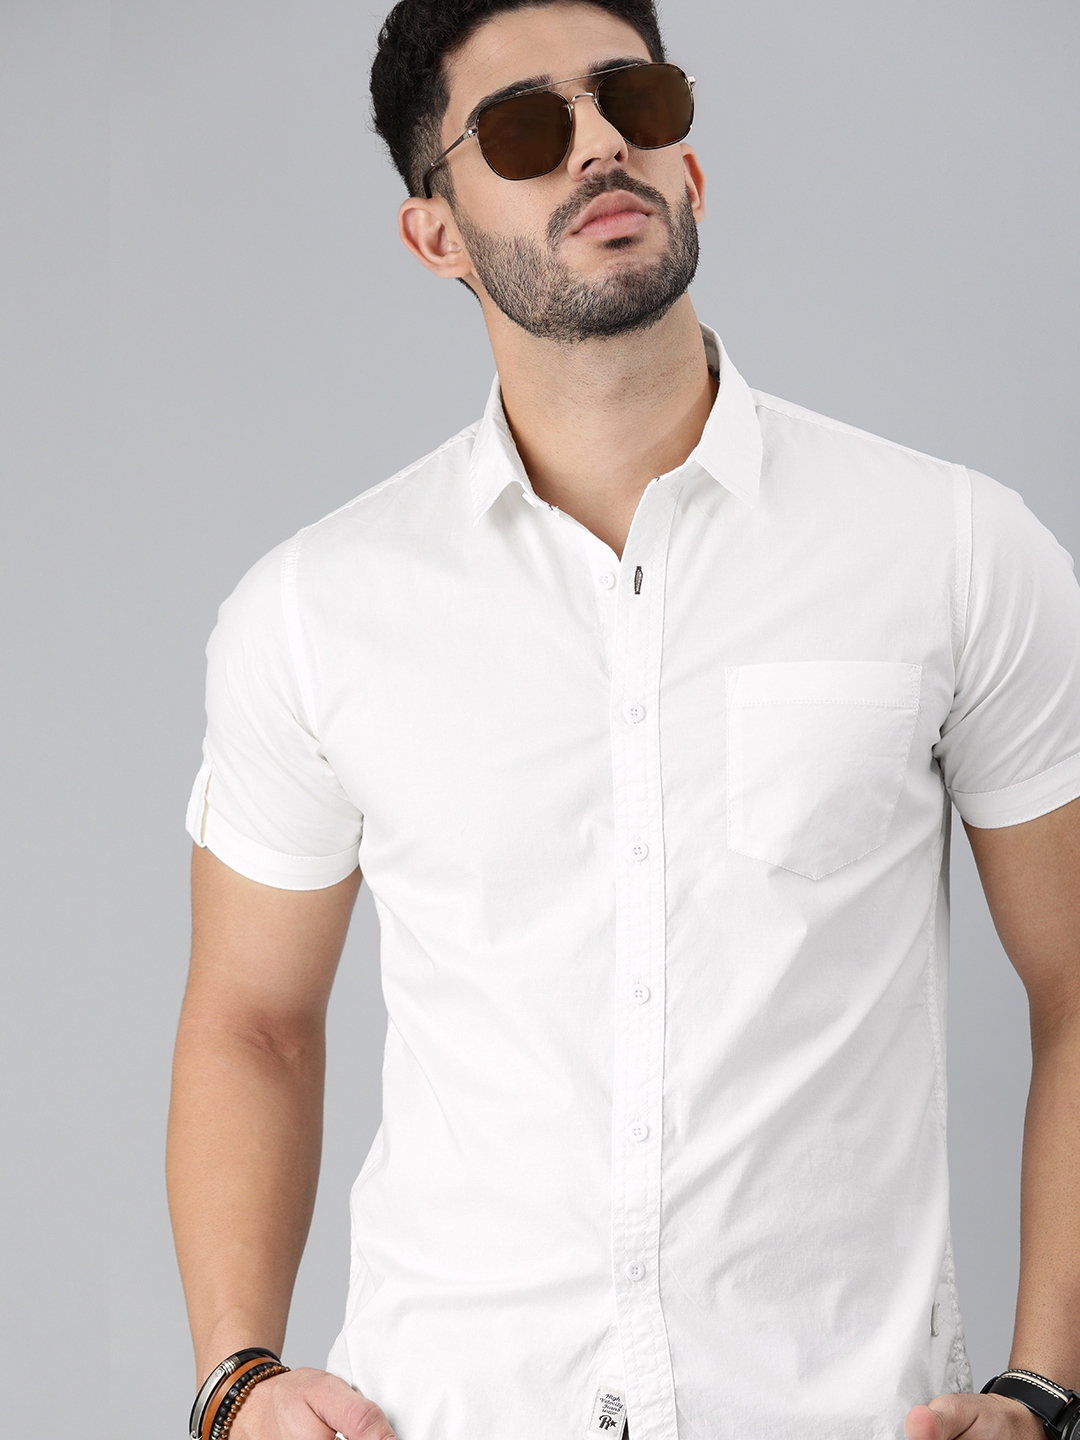 Buy The Roadster Lifestyle Co Men White Slim Fit Casual Shirt - Shirts ...